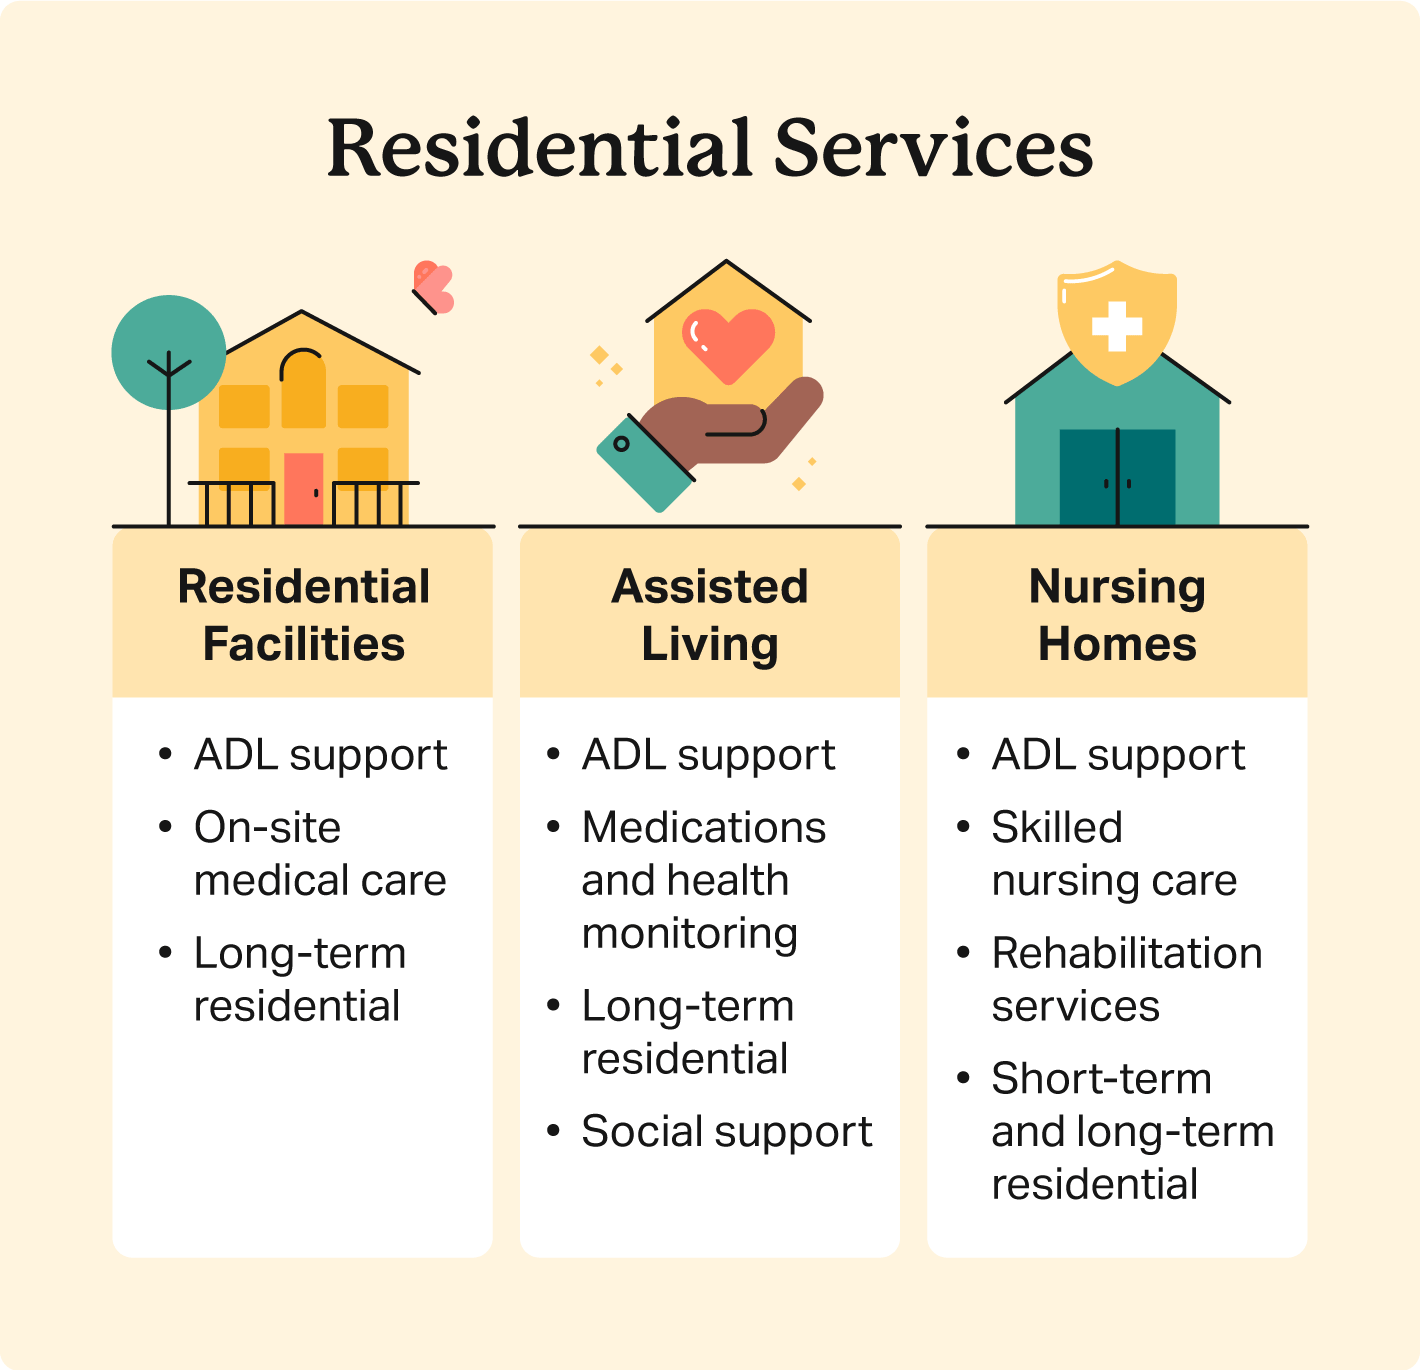 Illustrated graphic compares residential facilities, assisted living, and nursing home services. 